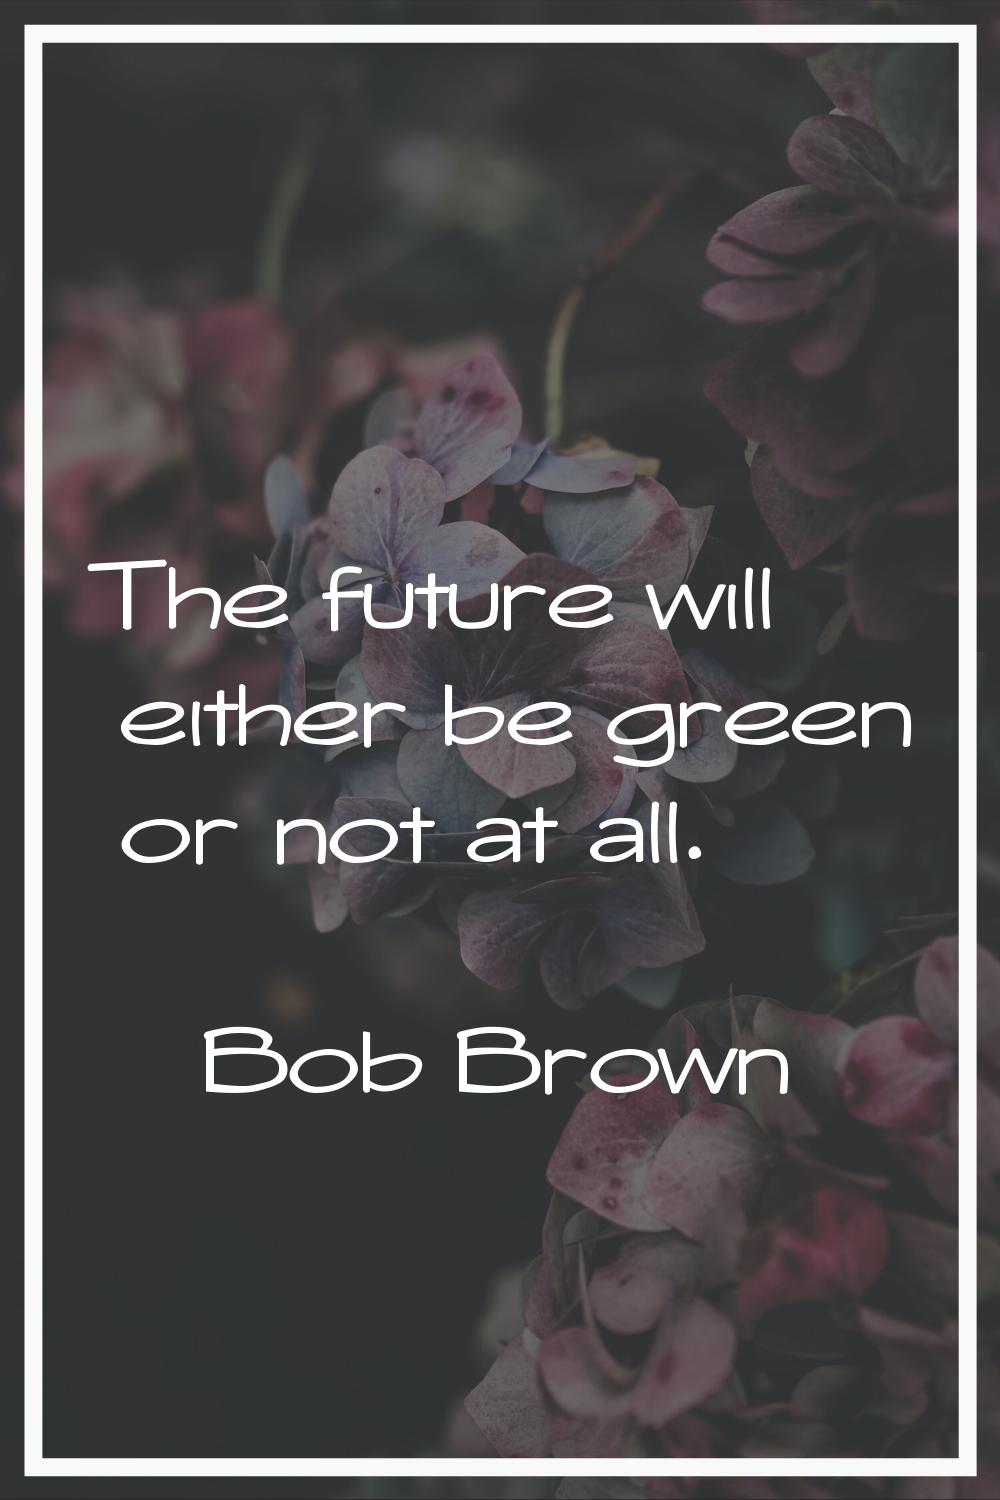 The future will either be green or not at all.